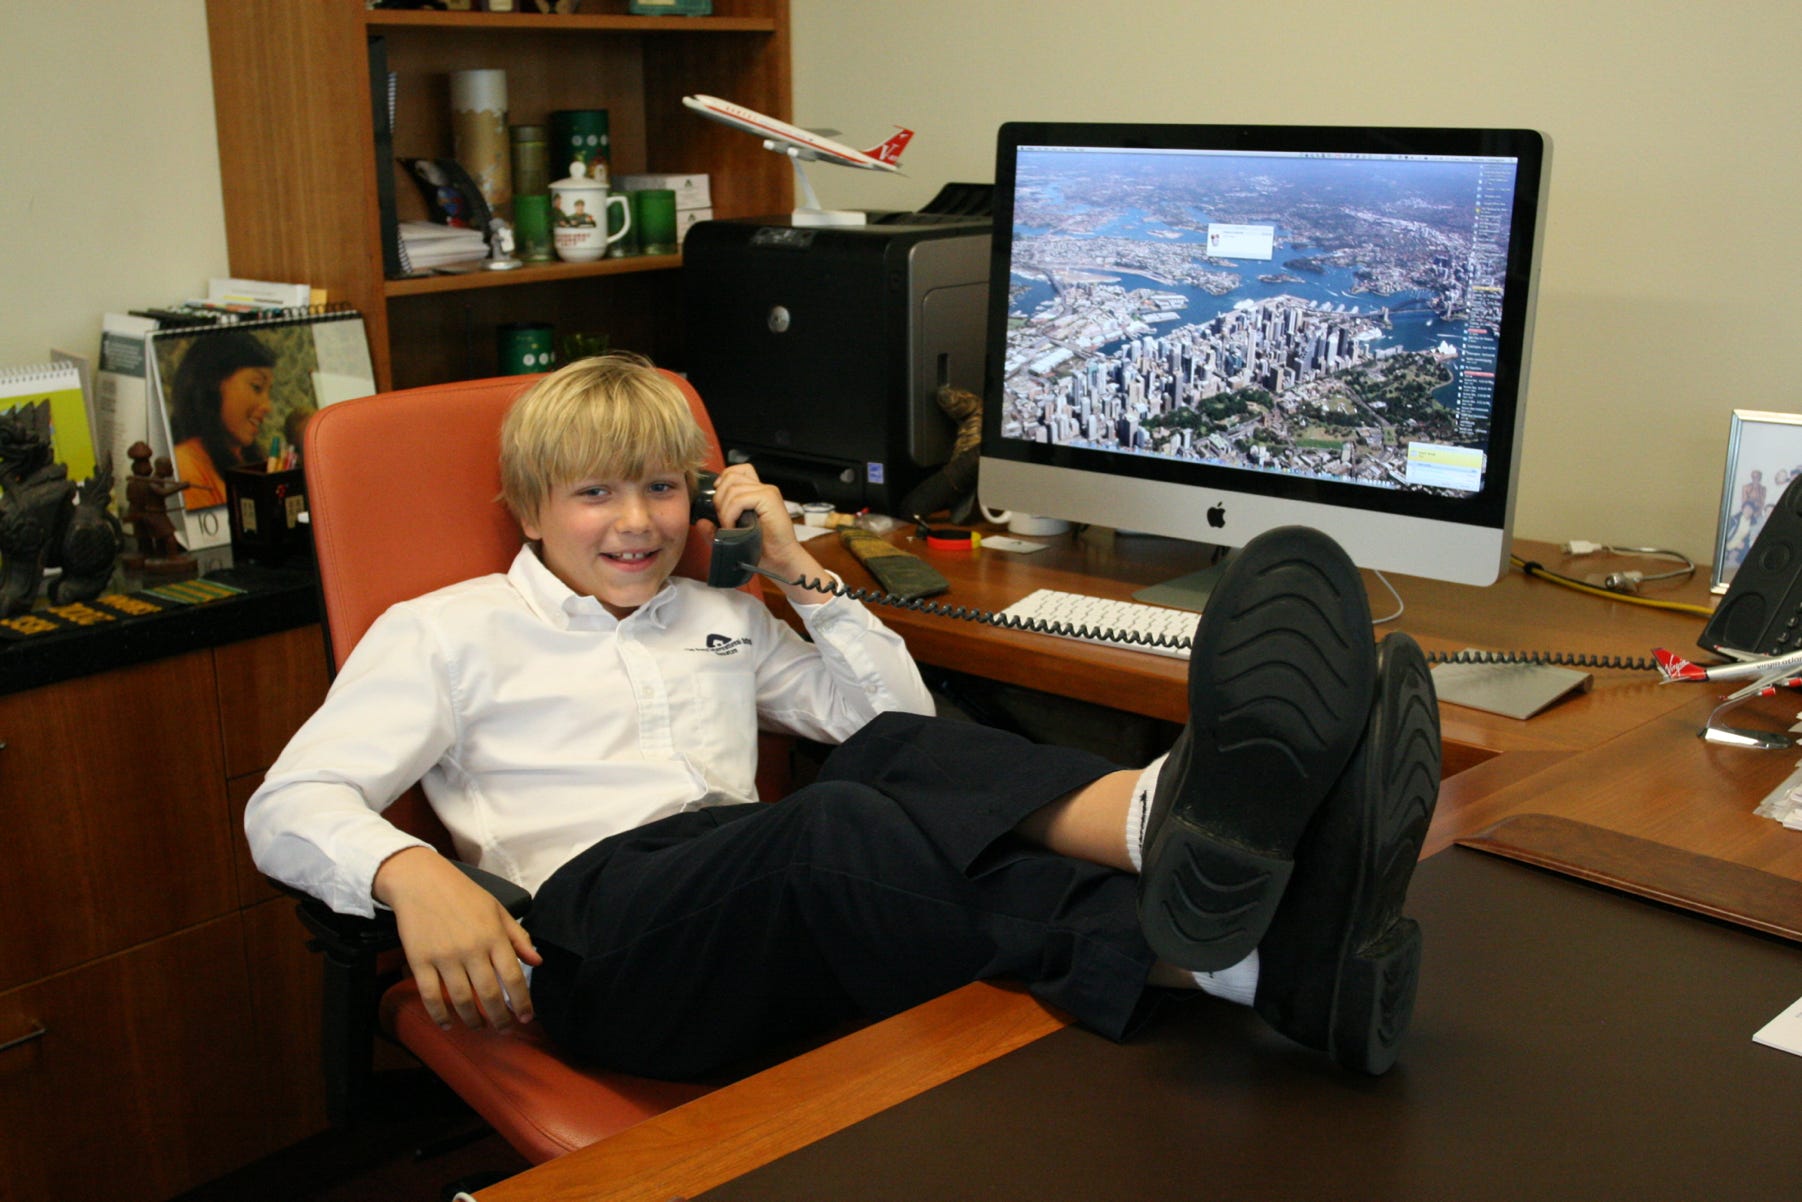 A student of The Awty International School in Houston, Texas, USA, 'plays' being Principal for a Day, and sits at the desk of the Principal, Dr Stephen Codrington.